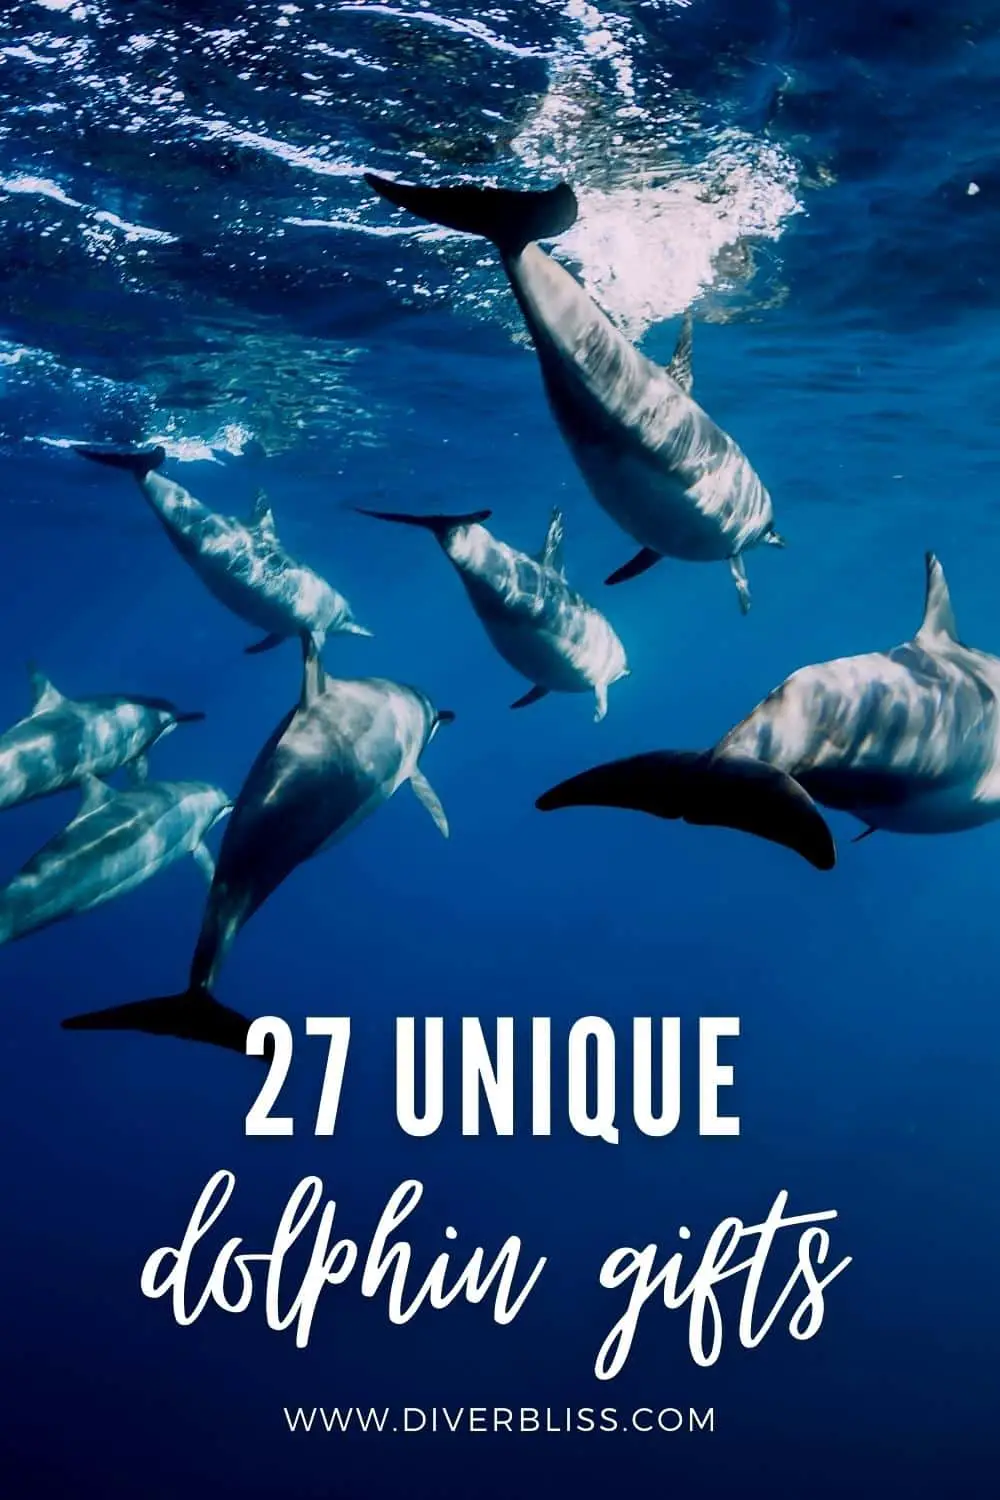 27 Unique dolphin gifts